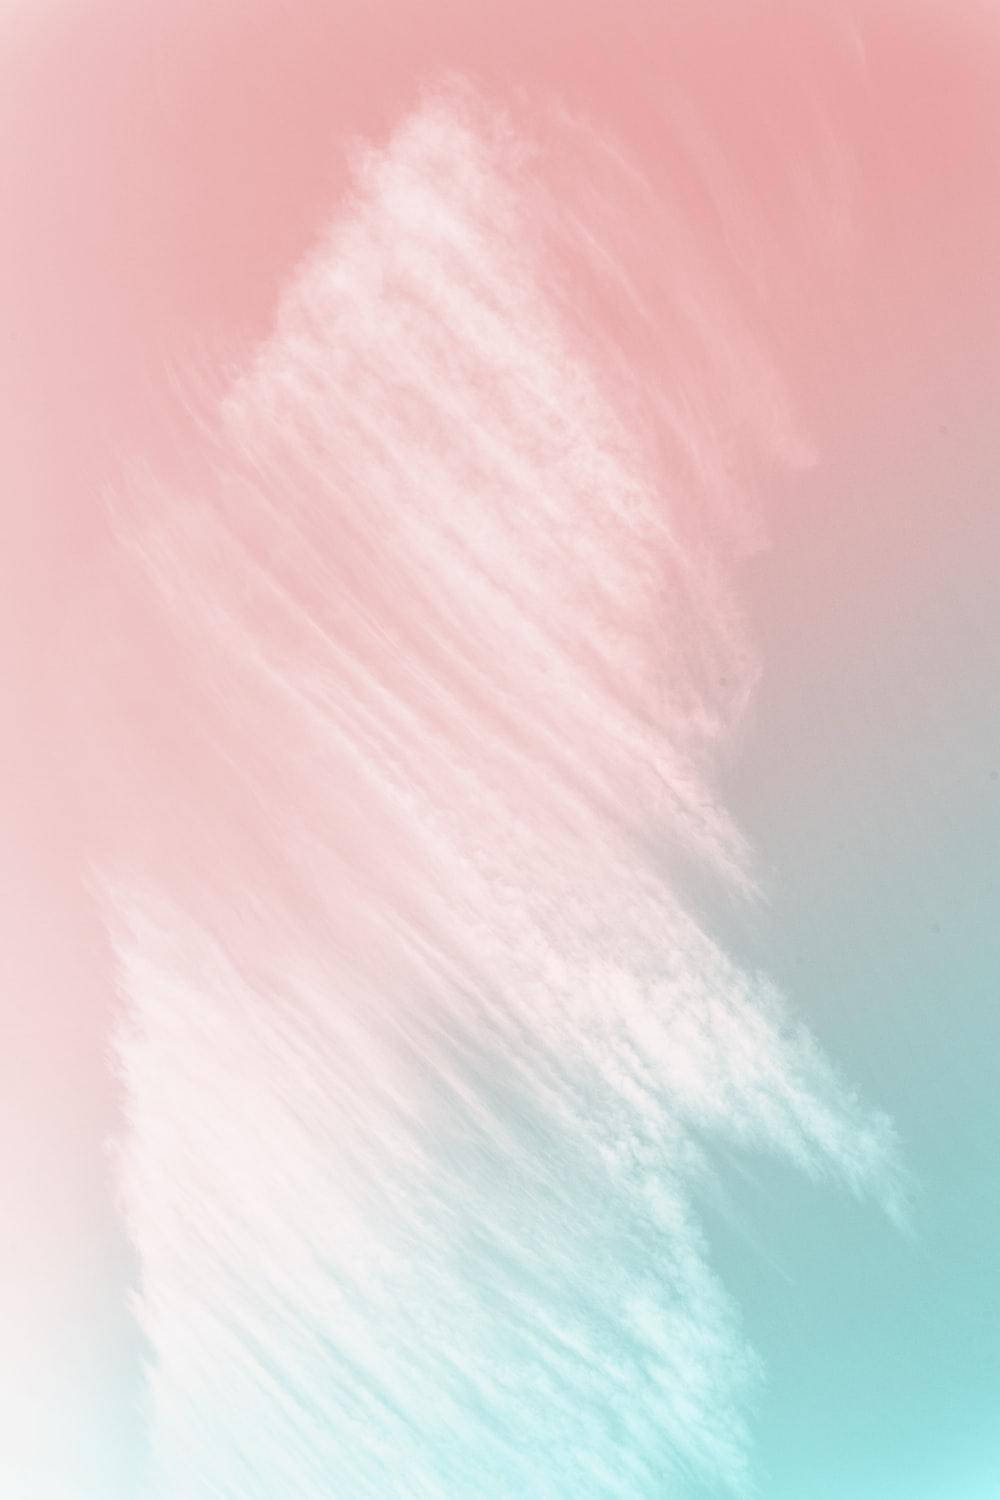 Aesthetic Peach Pink Cloudy Wallpaper